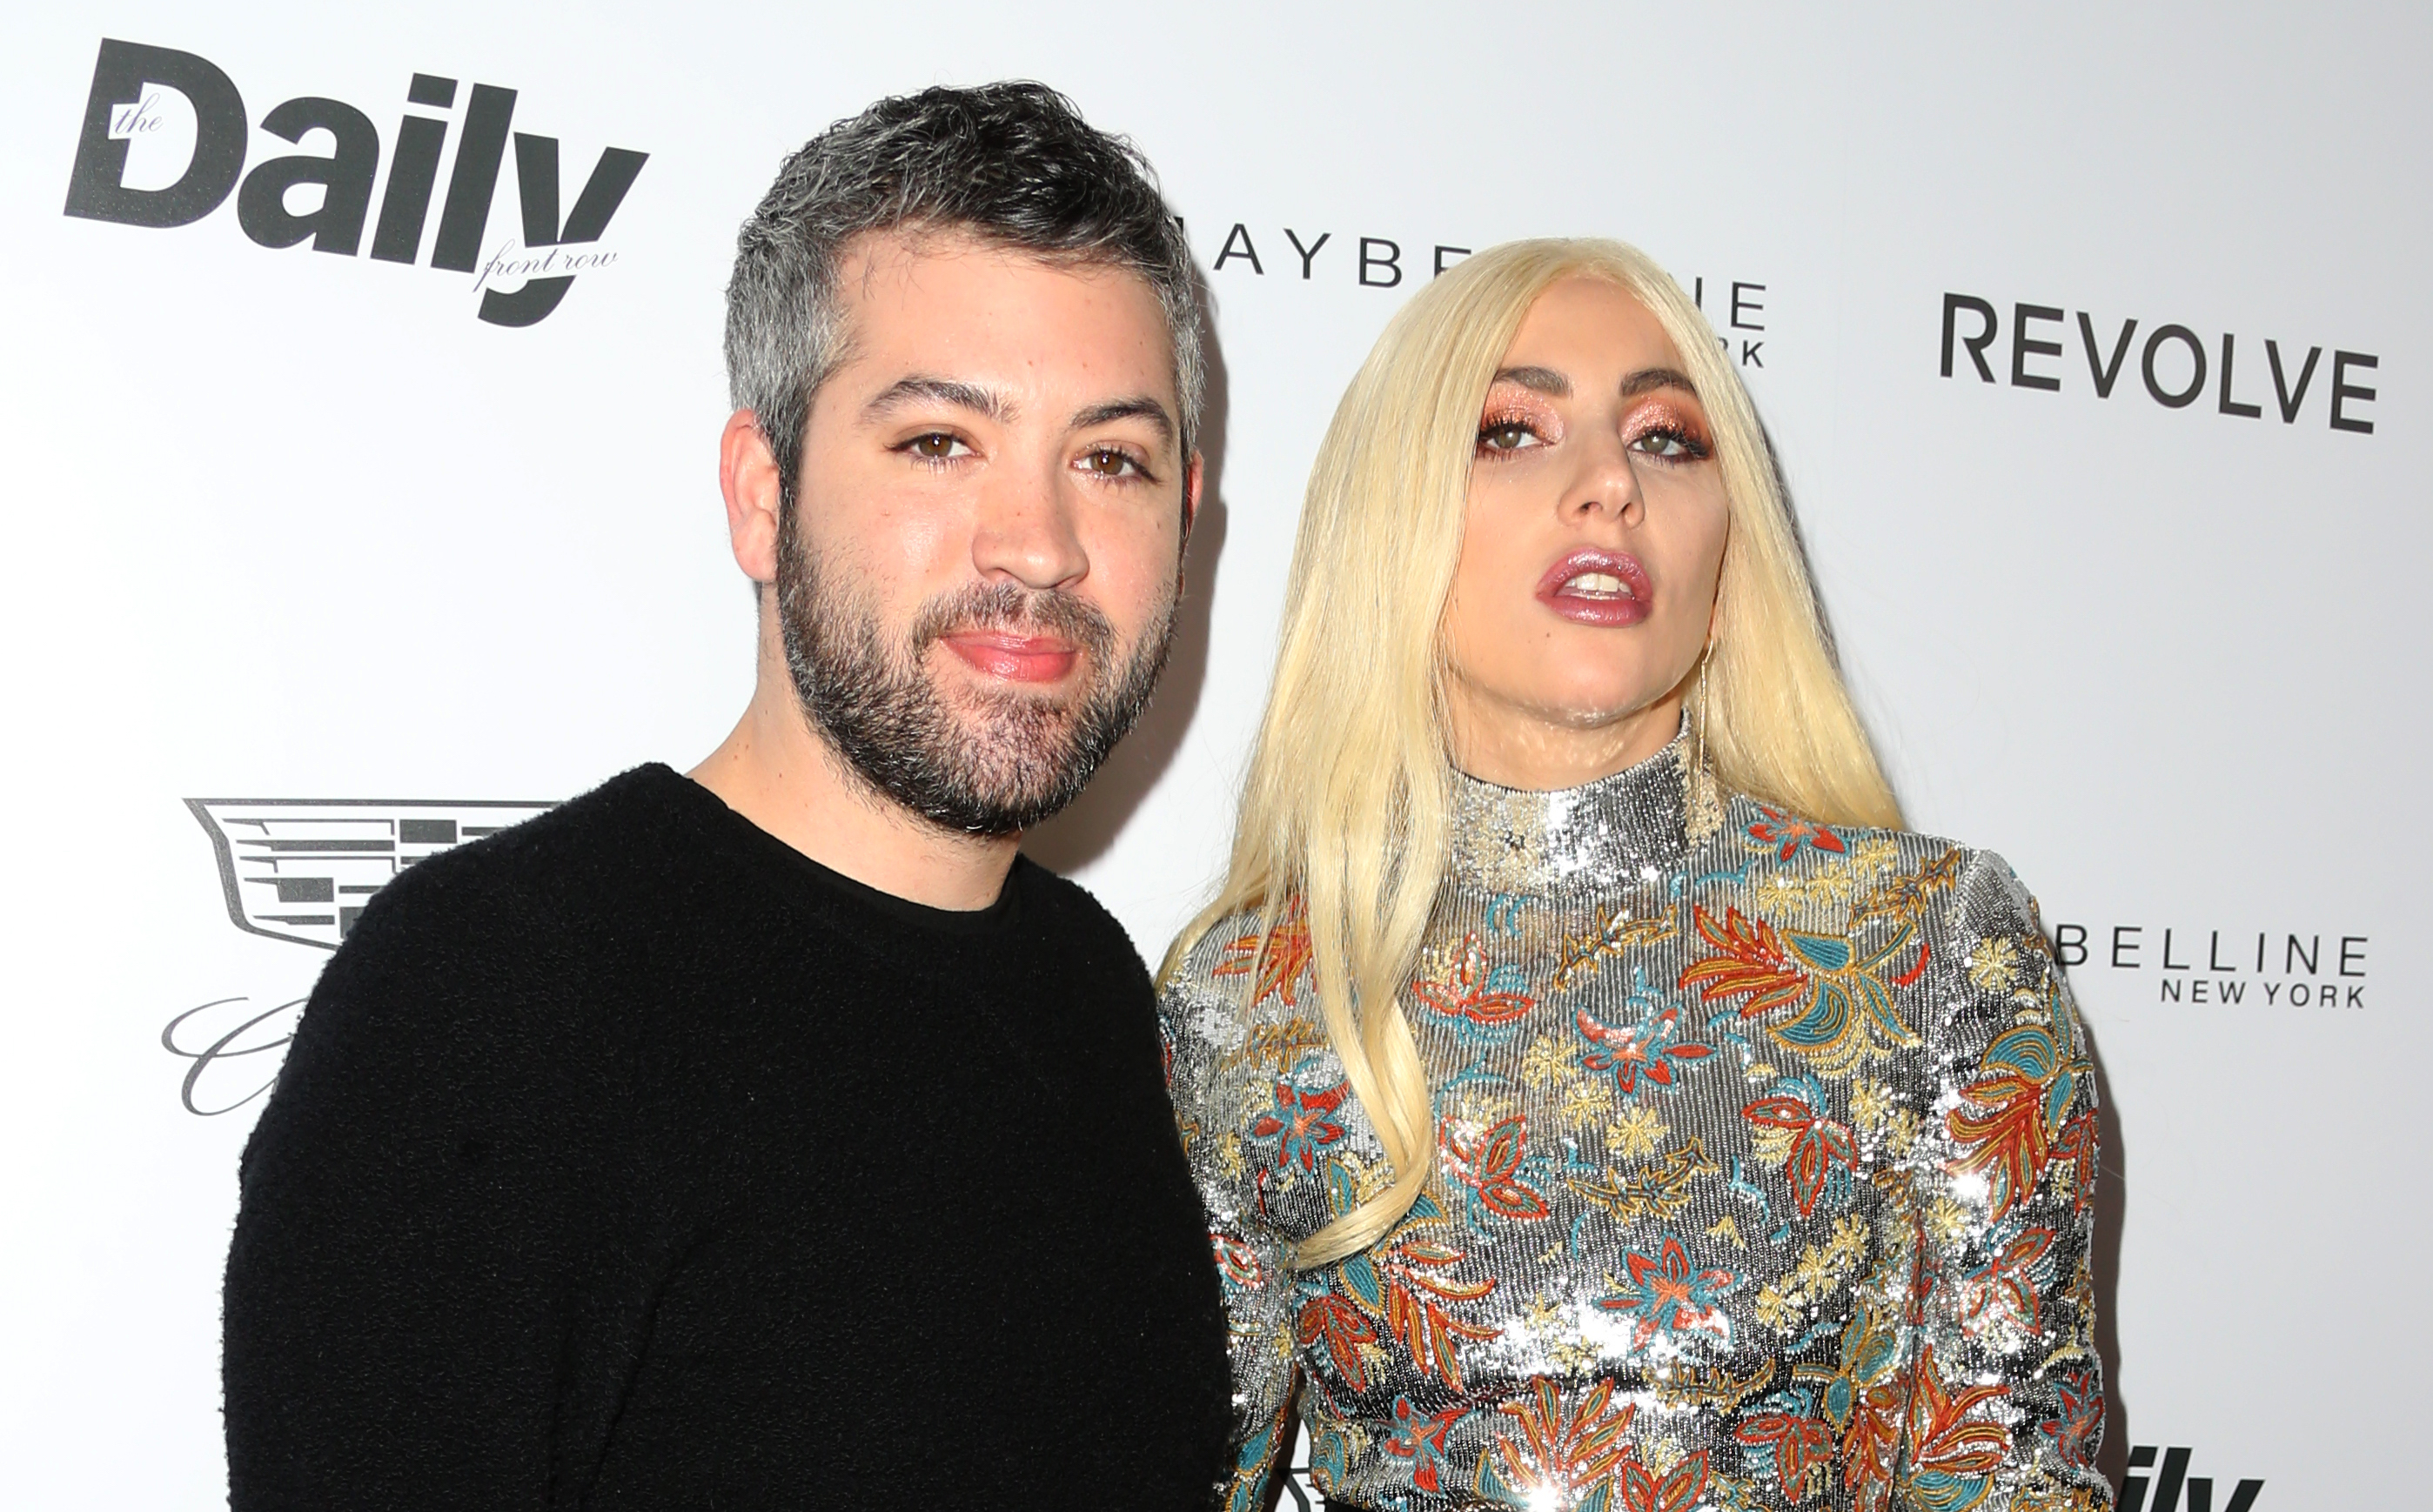 Lady Gaga and her stylist have a 4 a.m. kind of friendship